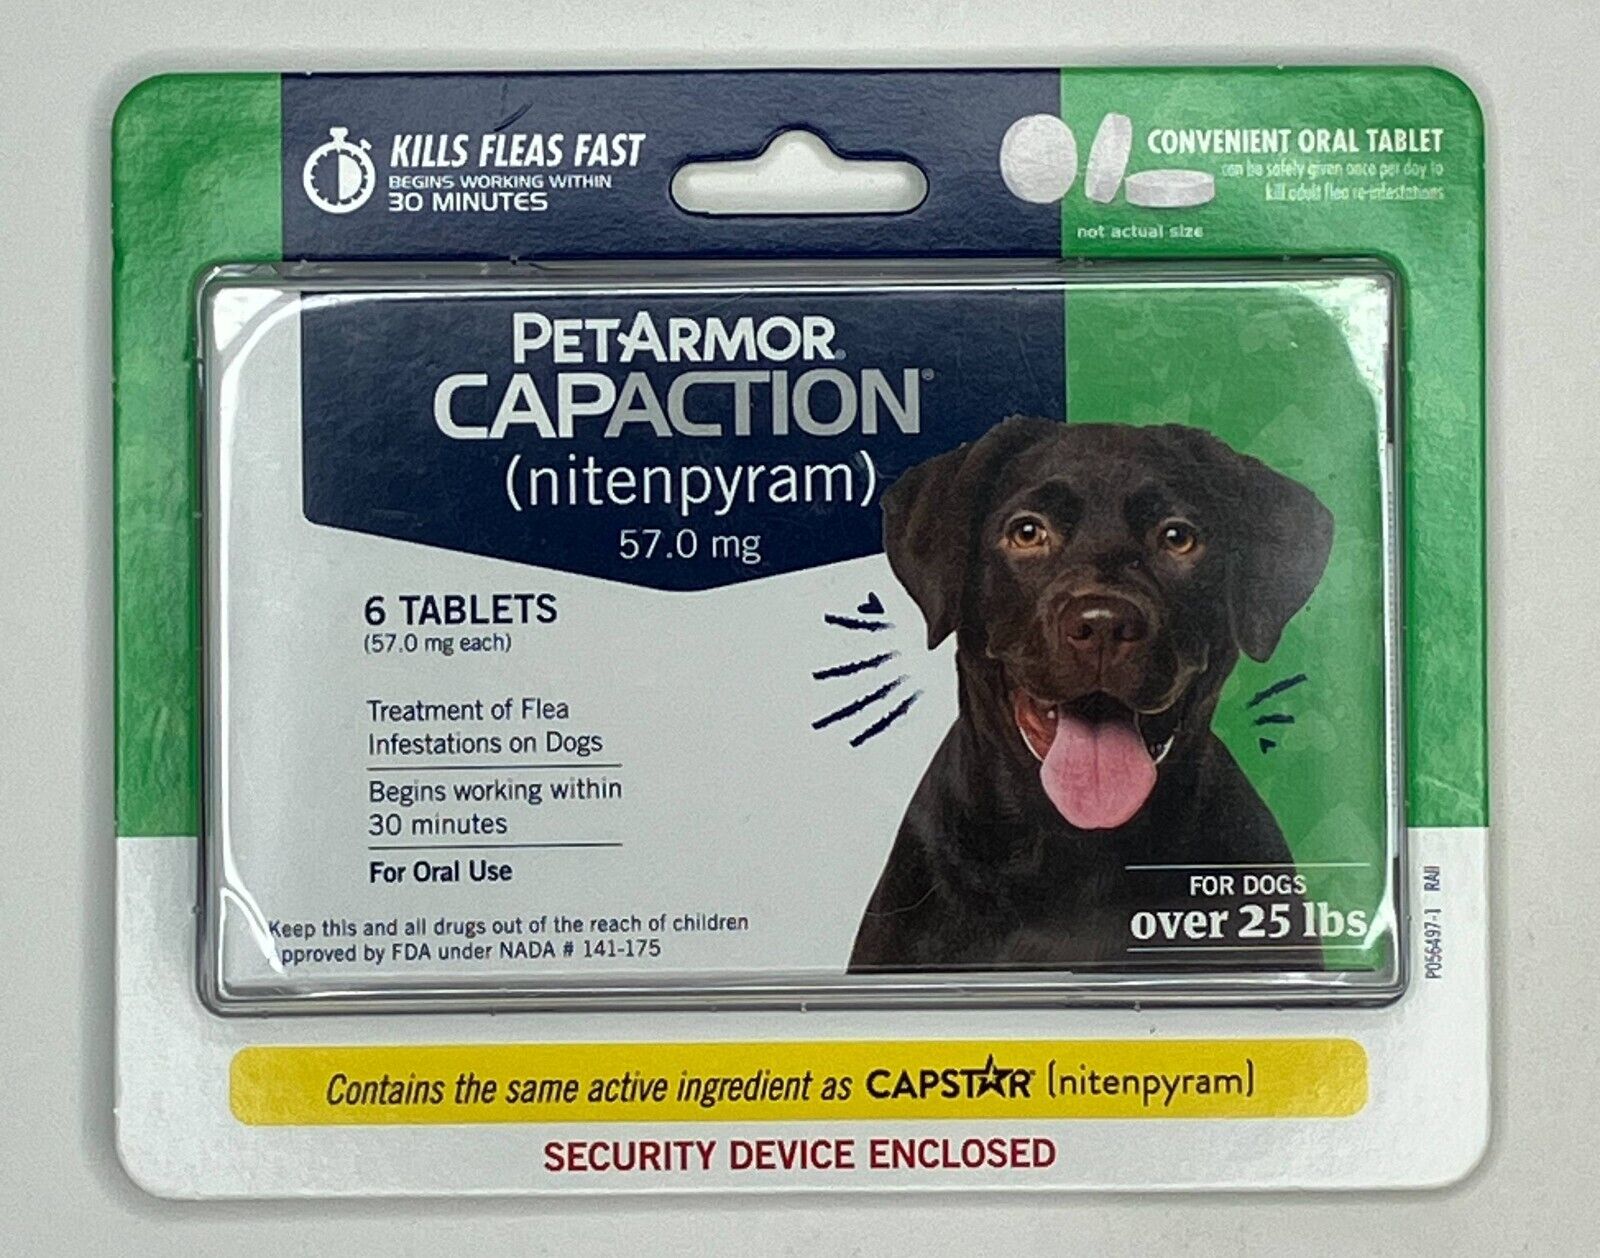 PetArmor Capaction Oral Flea Treatment for Dogs Over 25 lbs 6 tablets NEW SEALED